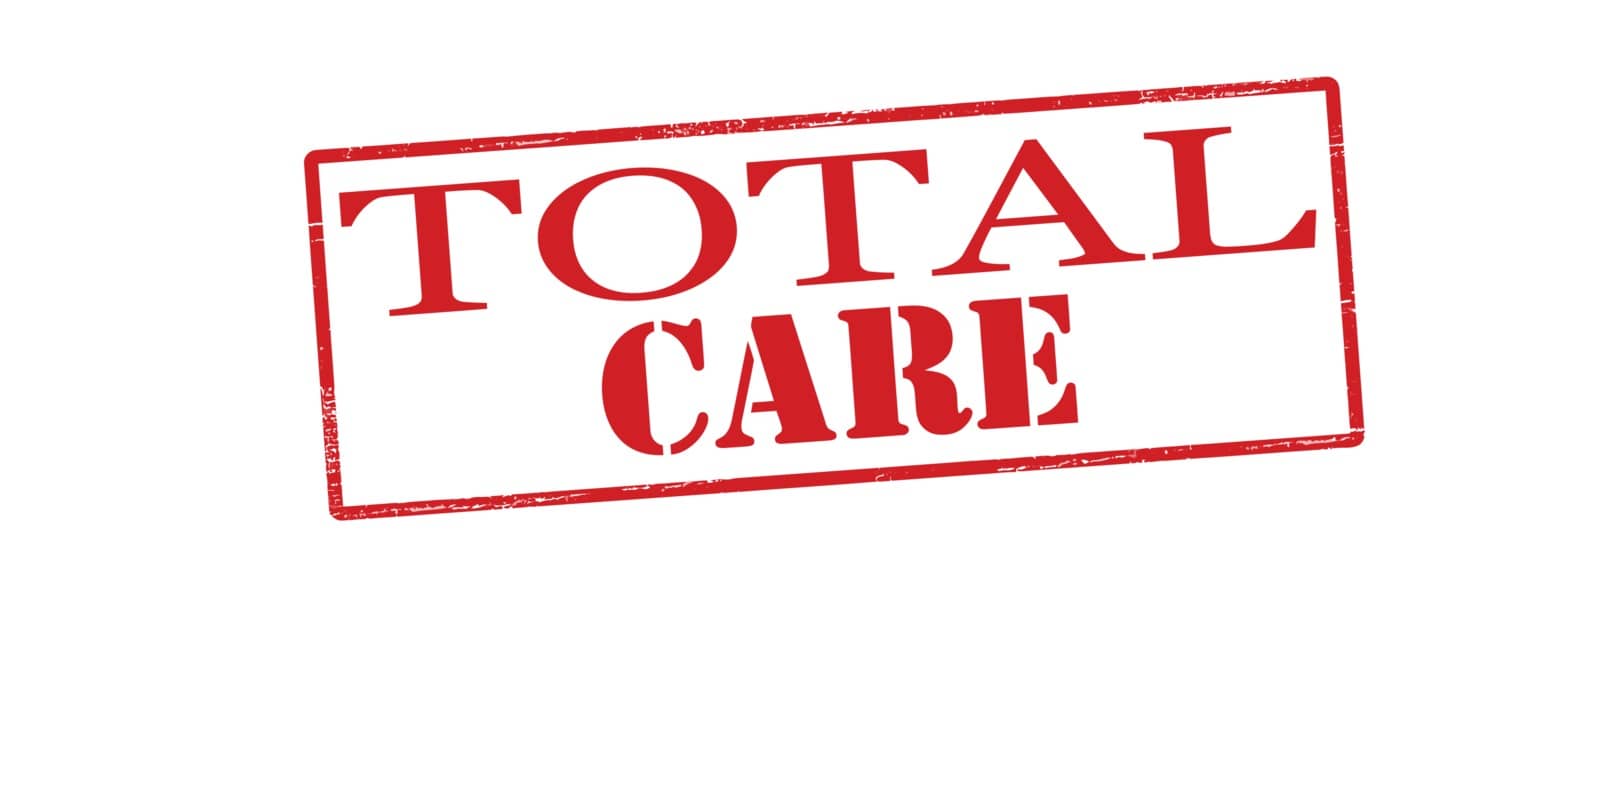 Total care by carmenbobo